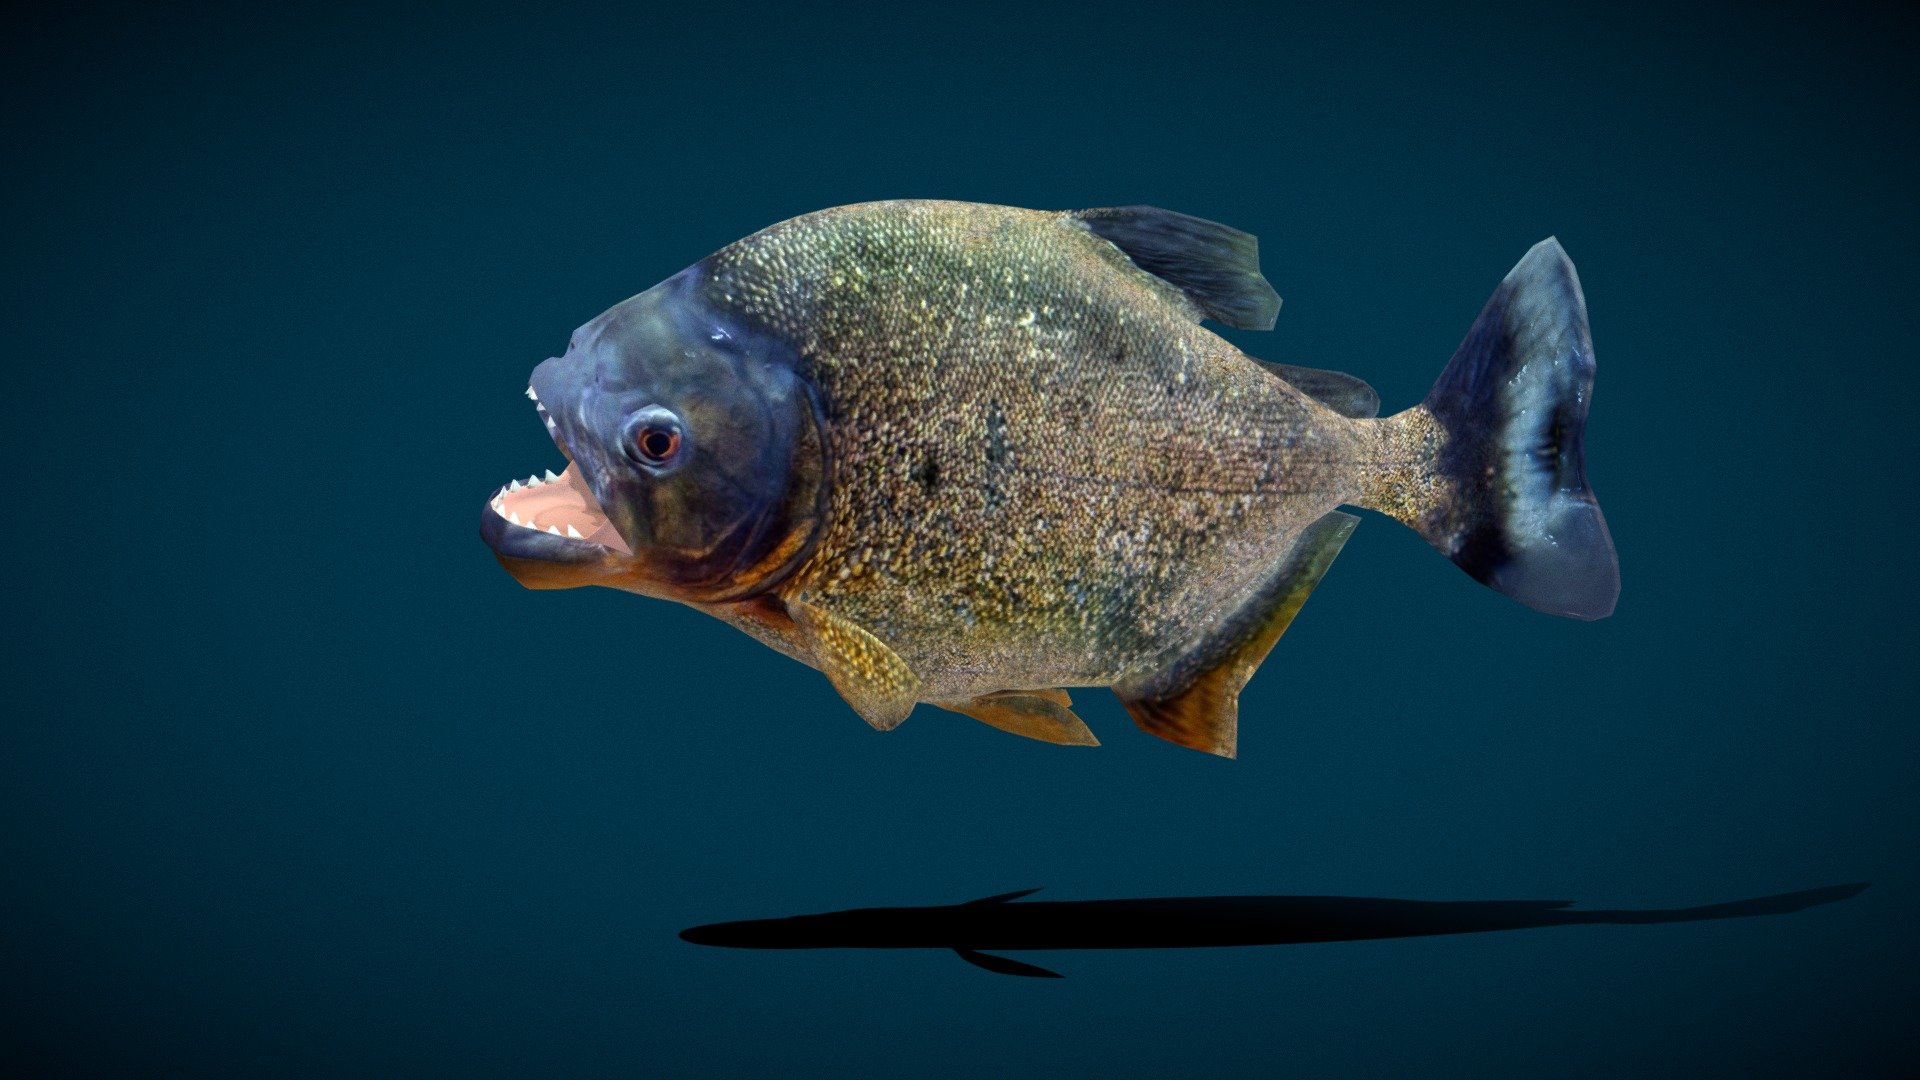 Low Poly

Animated (Idle to Swim)

4K PBR Textures

Blend File (With smooth Corrective Much better)


A piranha or piraña is one of a number of freshwater_fish in the family Serrasalmidae, or the subfamily Serrasalminae within the tetra family, Characidae in order Characiformes. These fish inhabit South American rivers, floodplains, lakes and reservoirs. Wikipedia
Family: Serrasalmidae
Missing taxonomy template (fix): Clupeocephala
Order: Characiformes
Pygocentrus_nattereri - Piranha Fish (Low poly) - 3D model by Nyilonelycompany 3d model